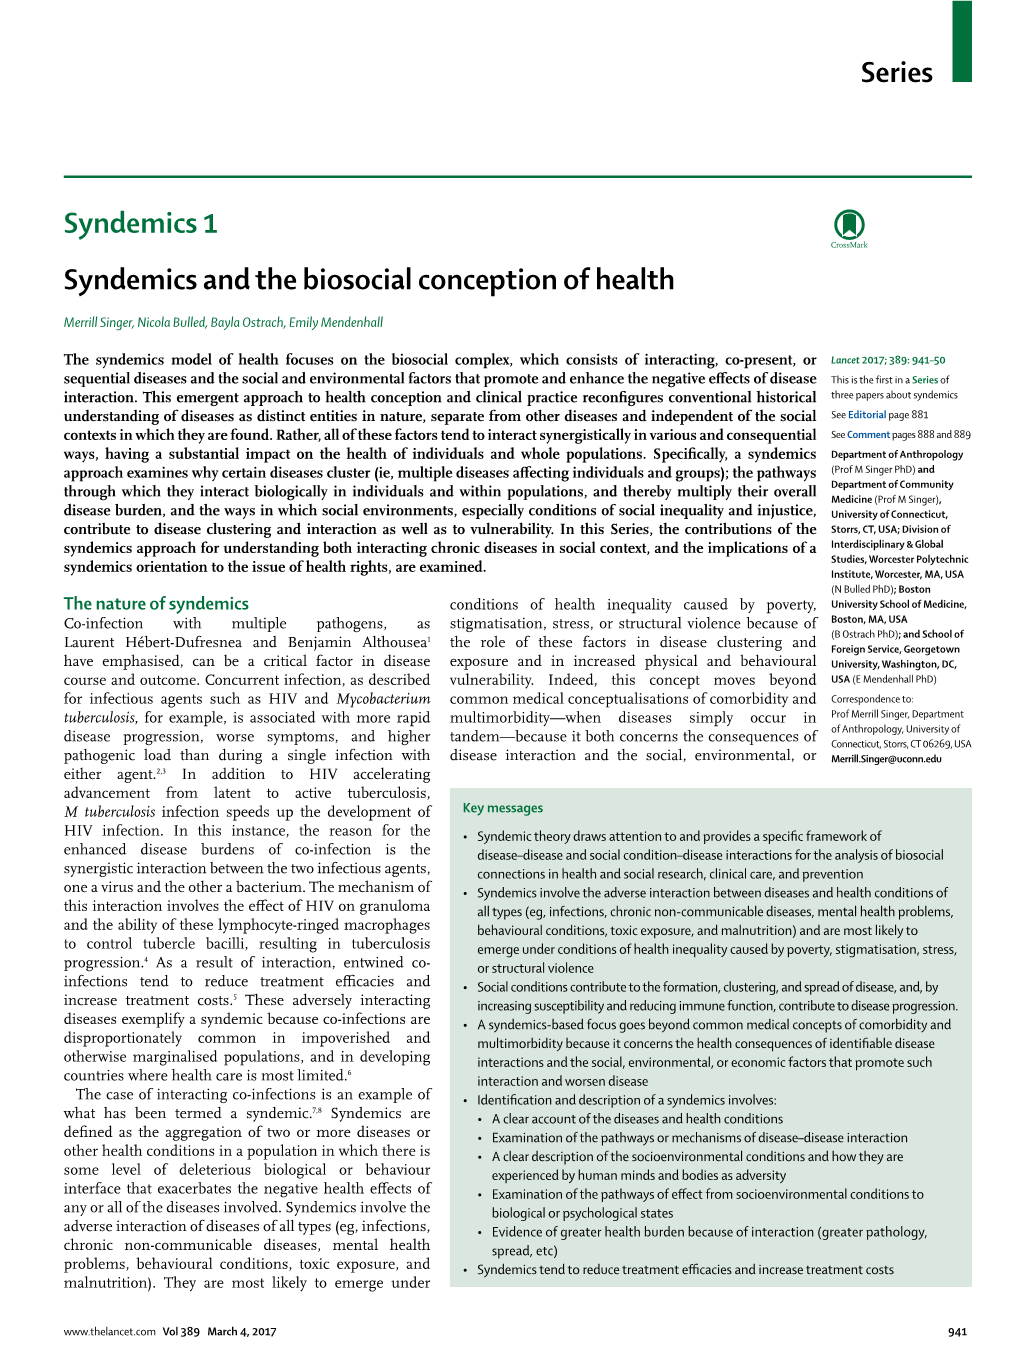 Syndemics and the Biosocial Conception of Health